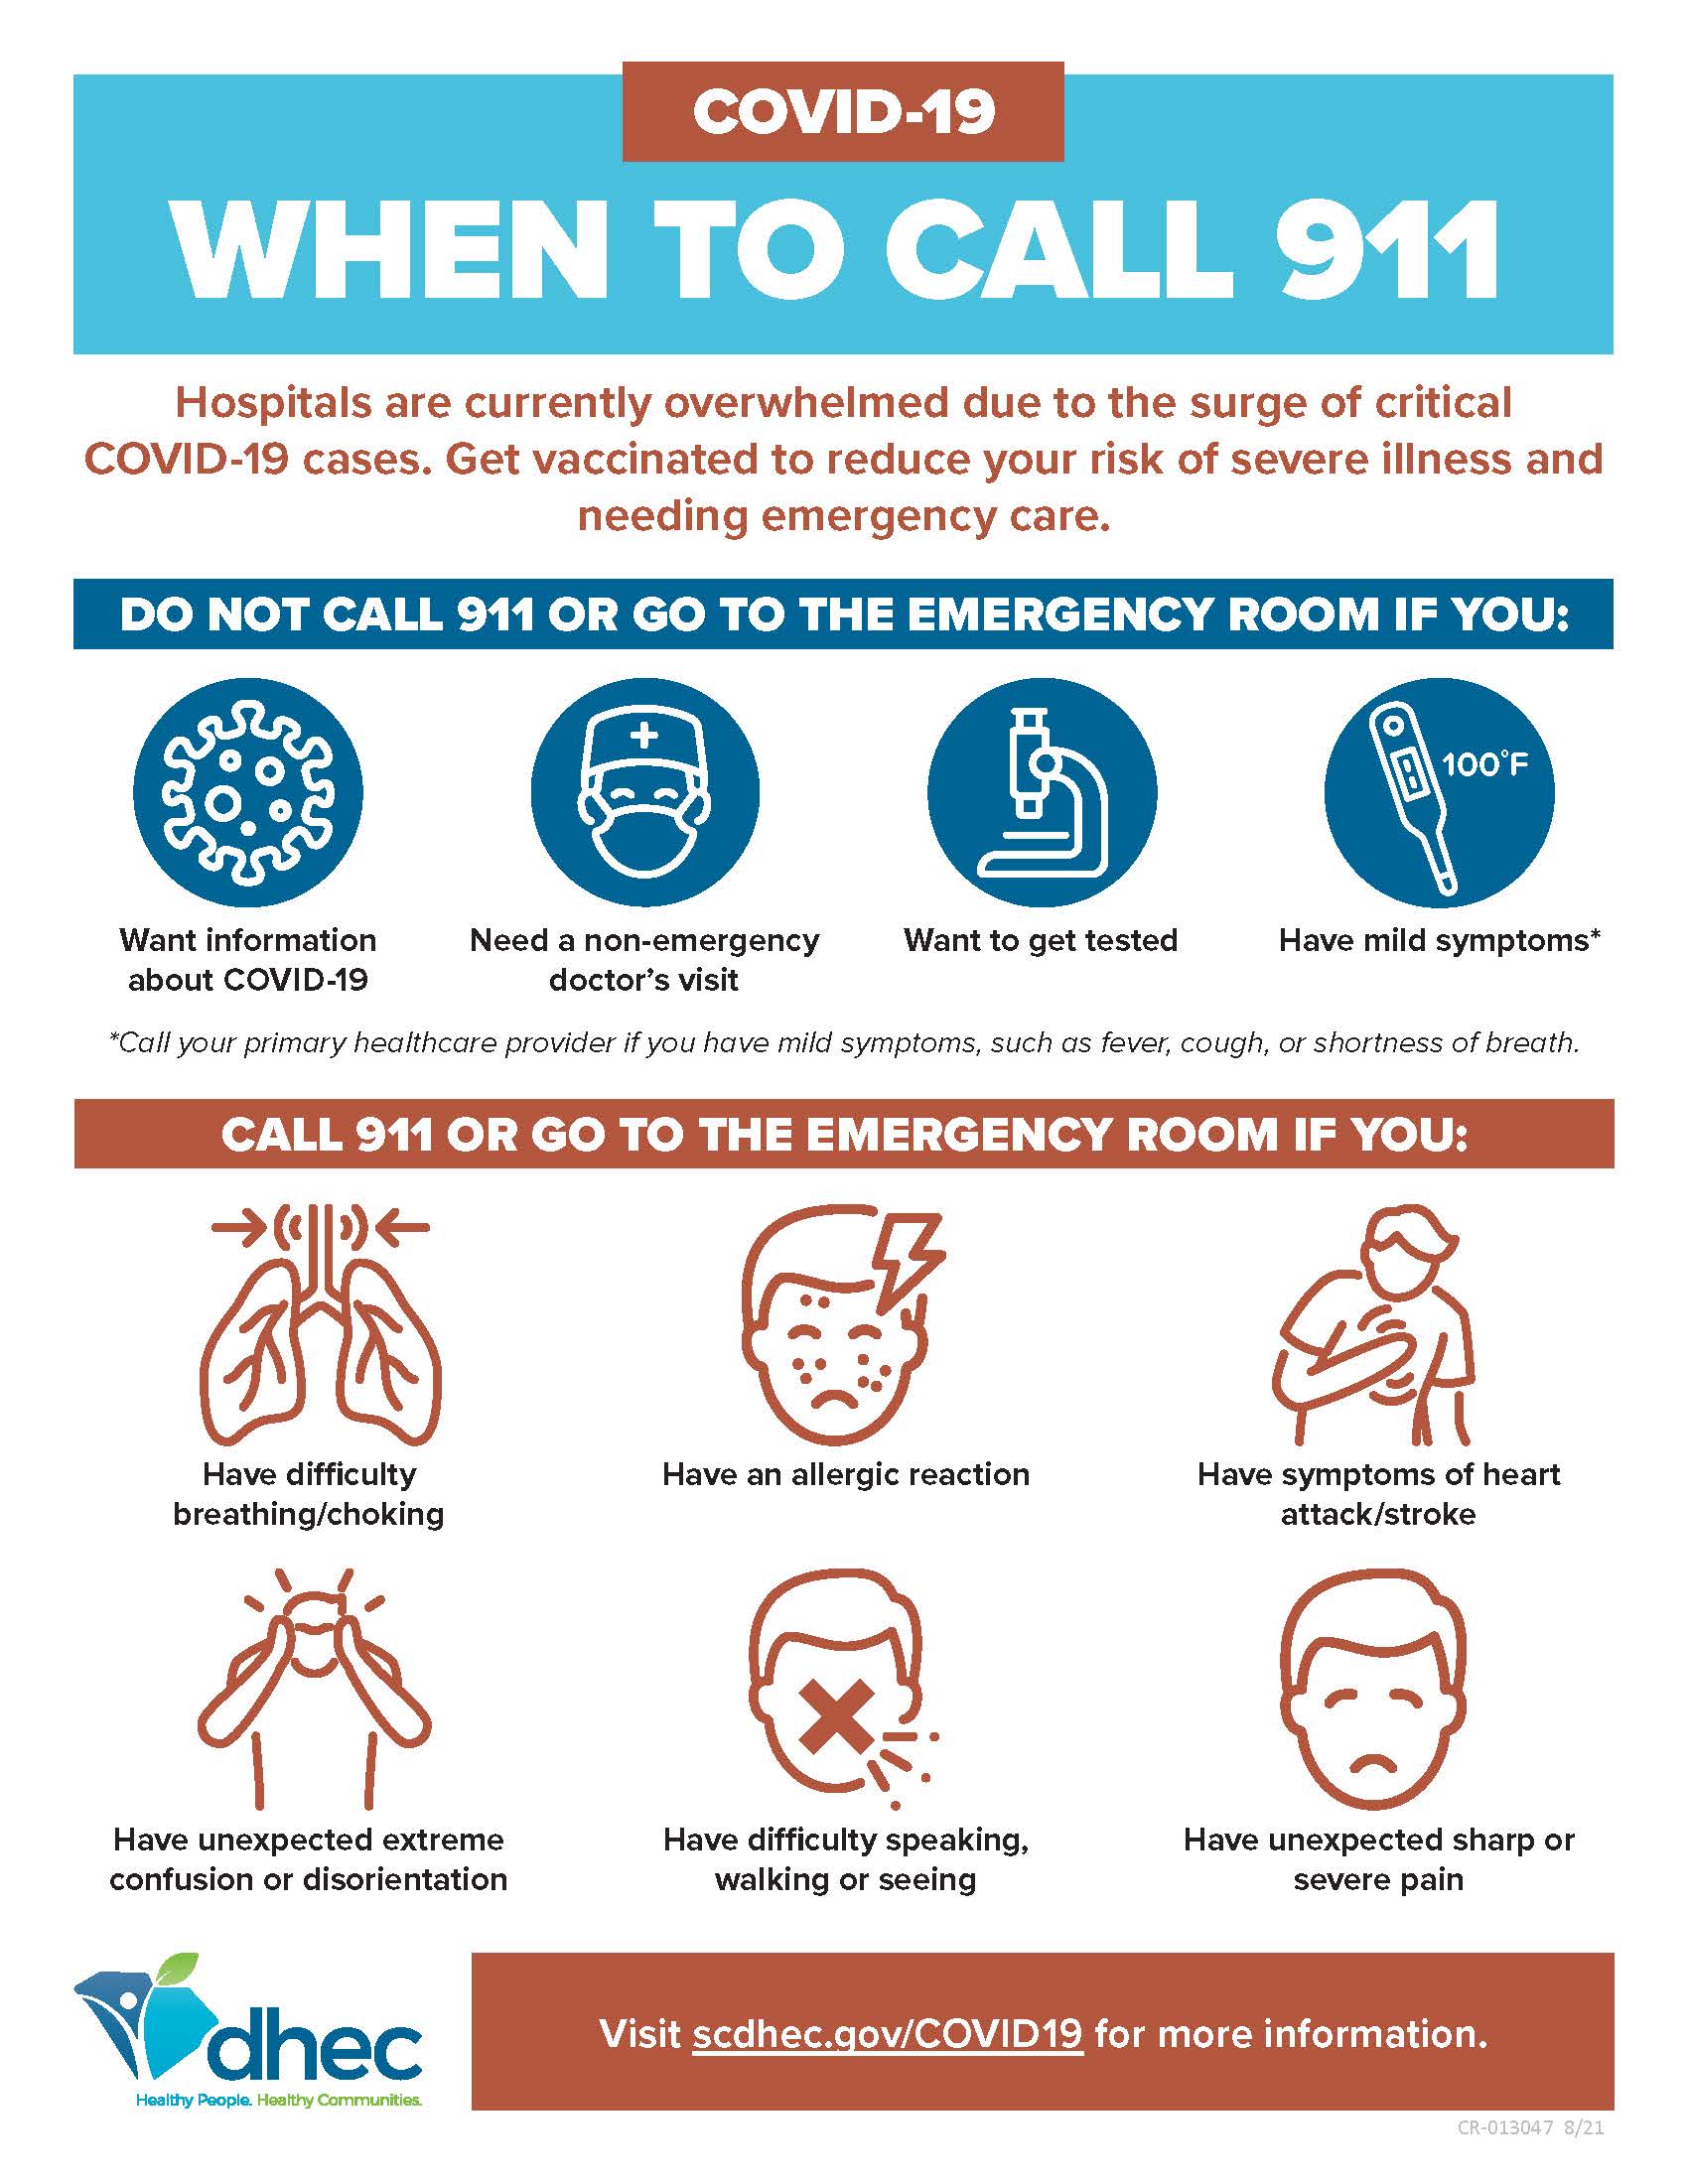 Covid 19 - Know When To Call 911